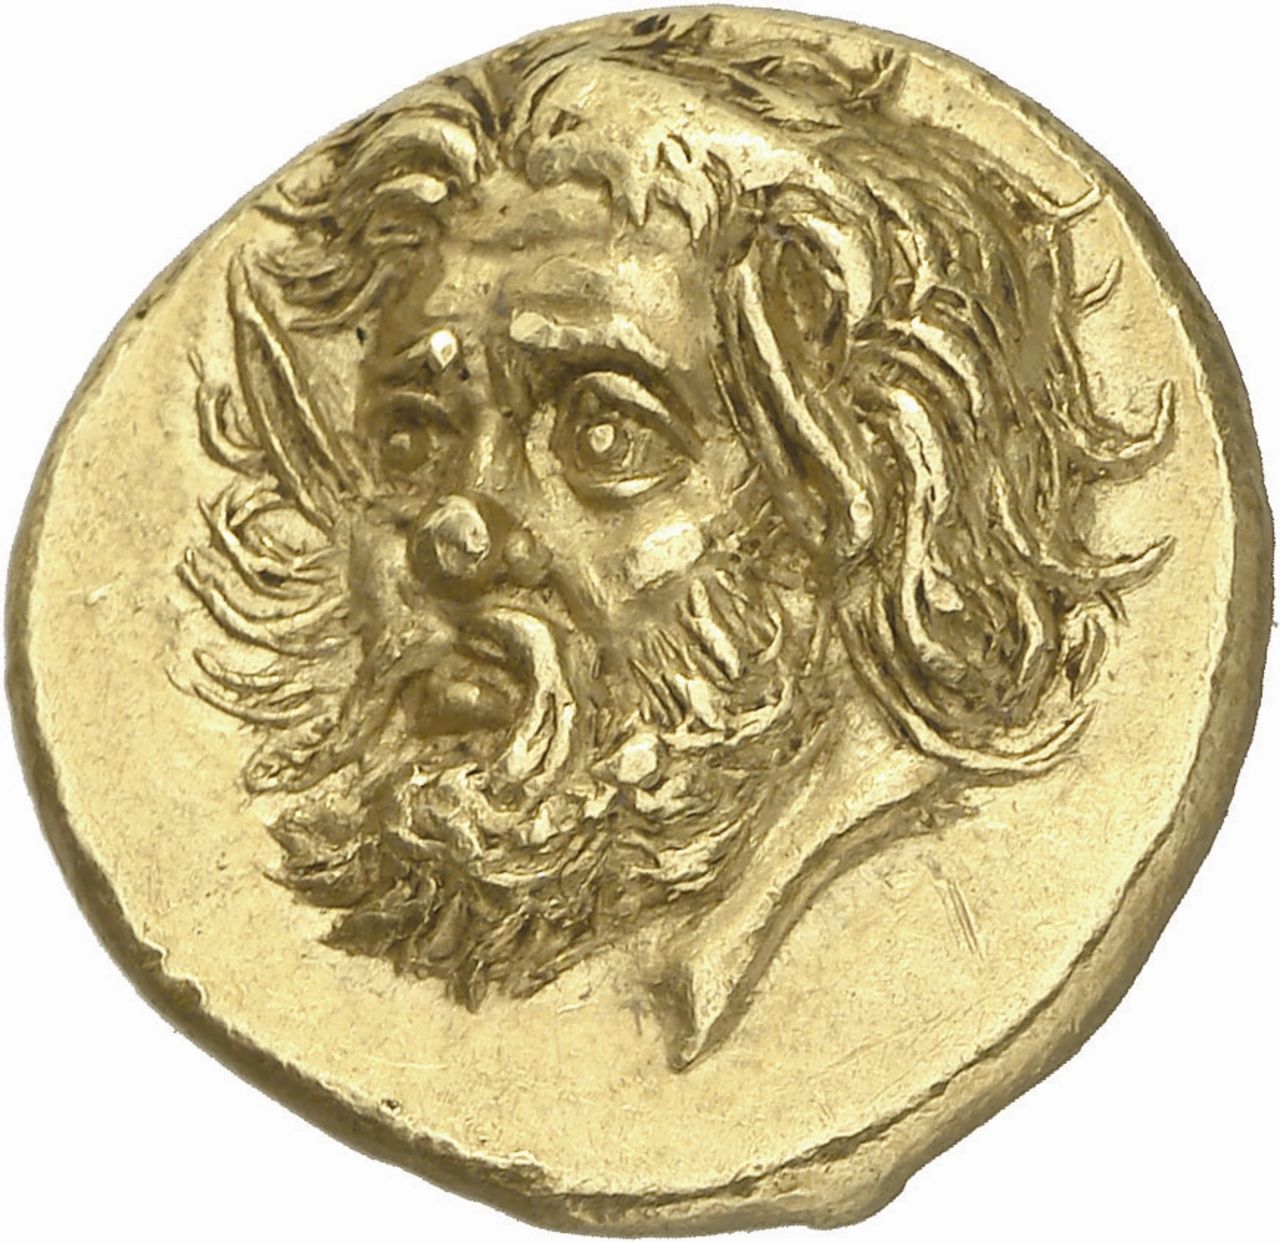 The most valuable coin in the collection is this Pantikapaion gold stater, depicting the head of a bearded satyr, which is expected to sell for more than $650,000.